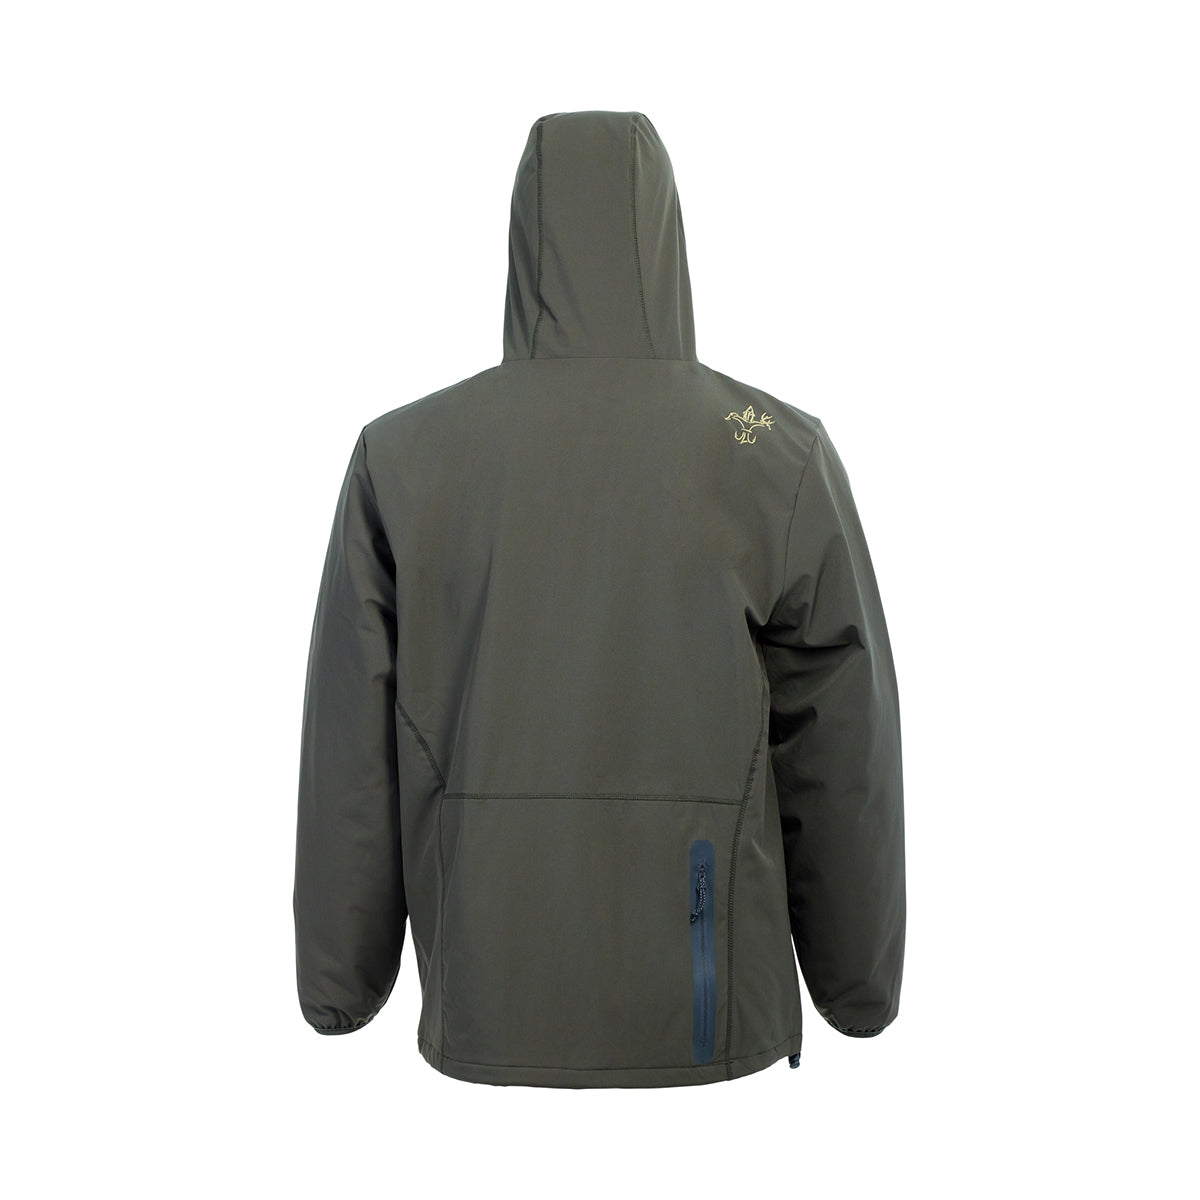 Outbound Insulated Camo Hoodie | Insulated Camo Hoodie | Sportsman Gear